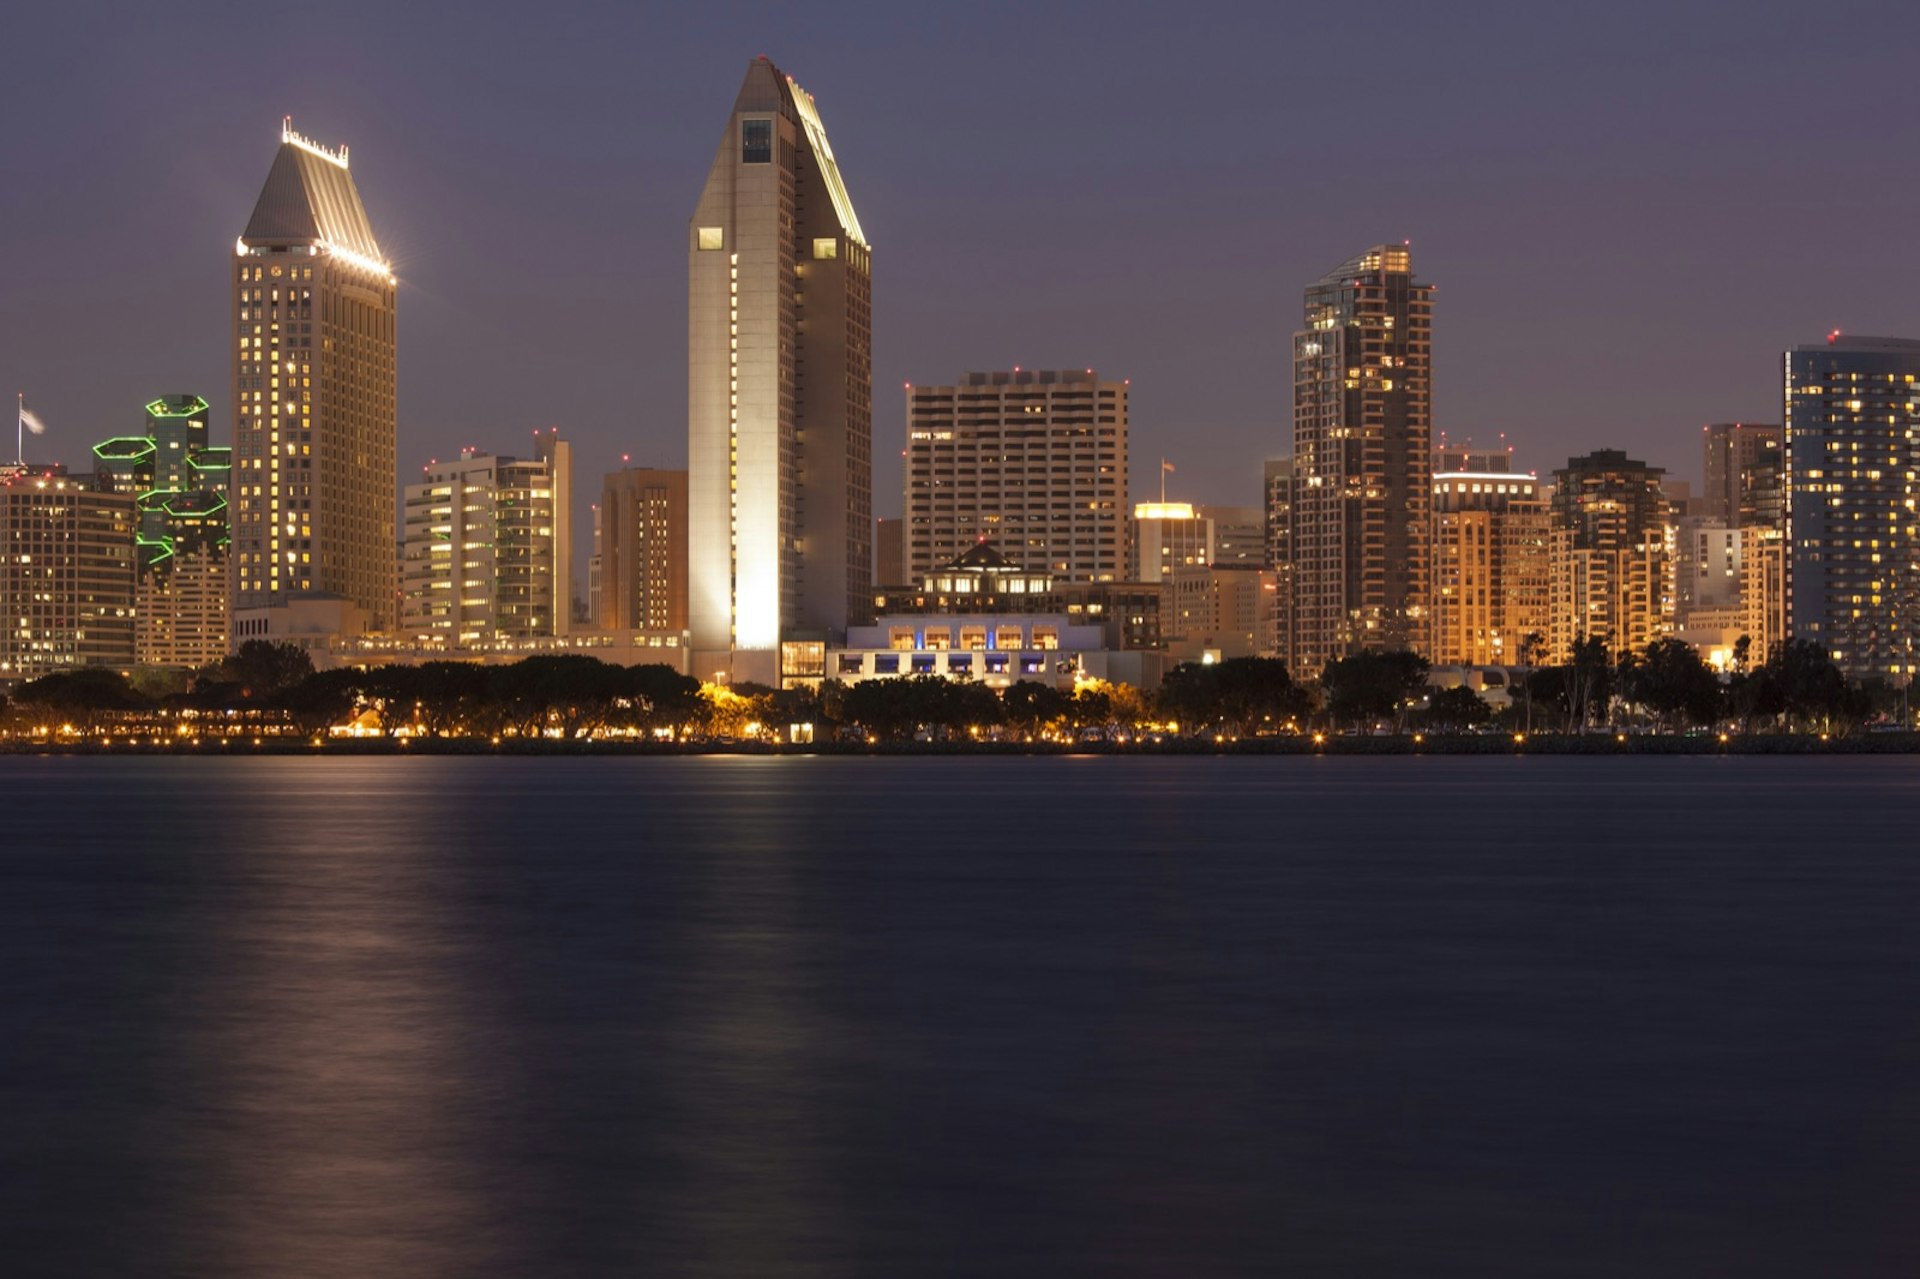 The San Diego skyline seen at night from across the bay a great city for a perfect weekend